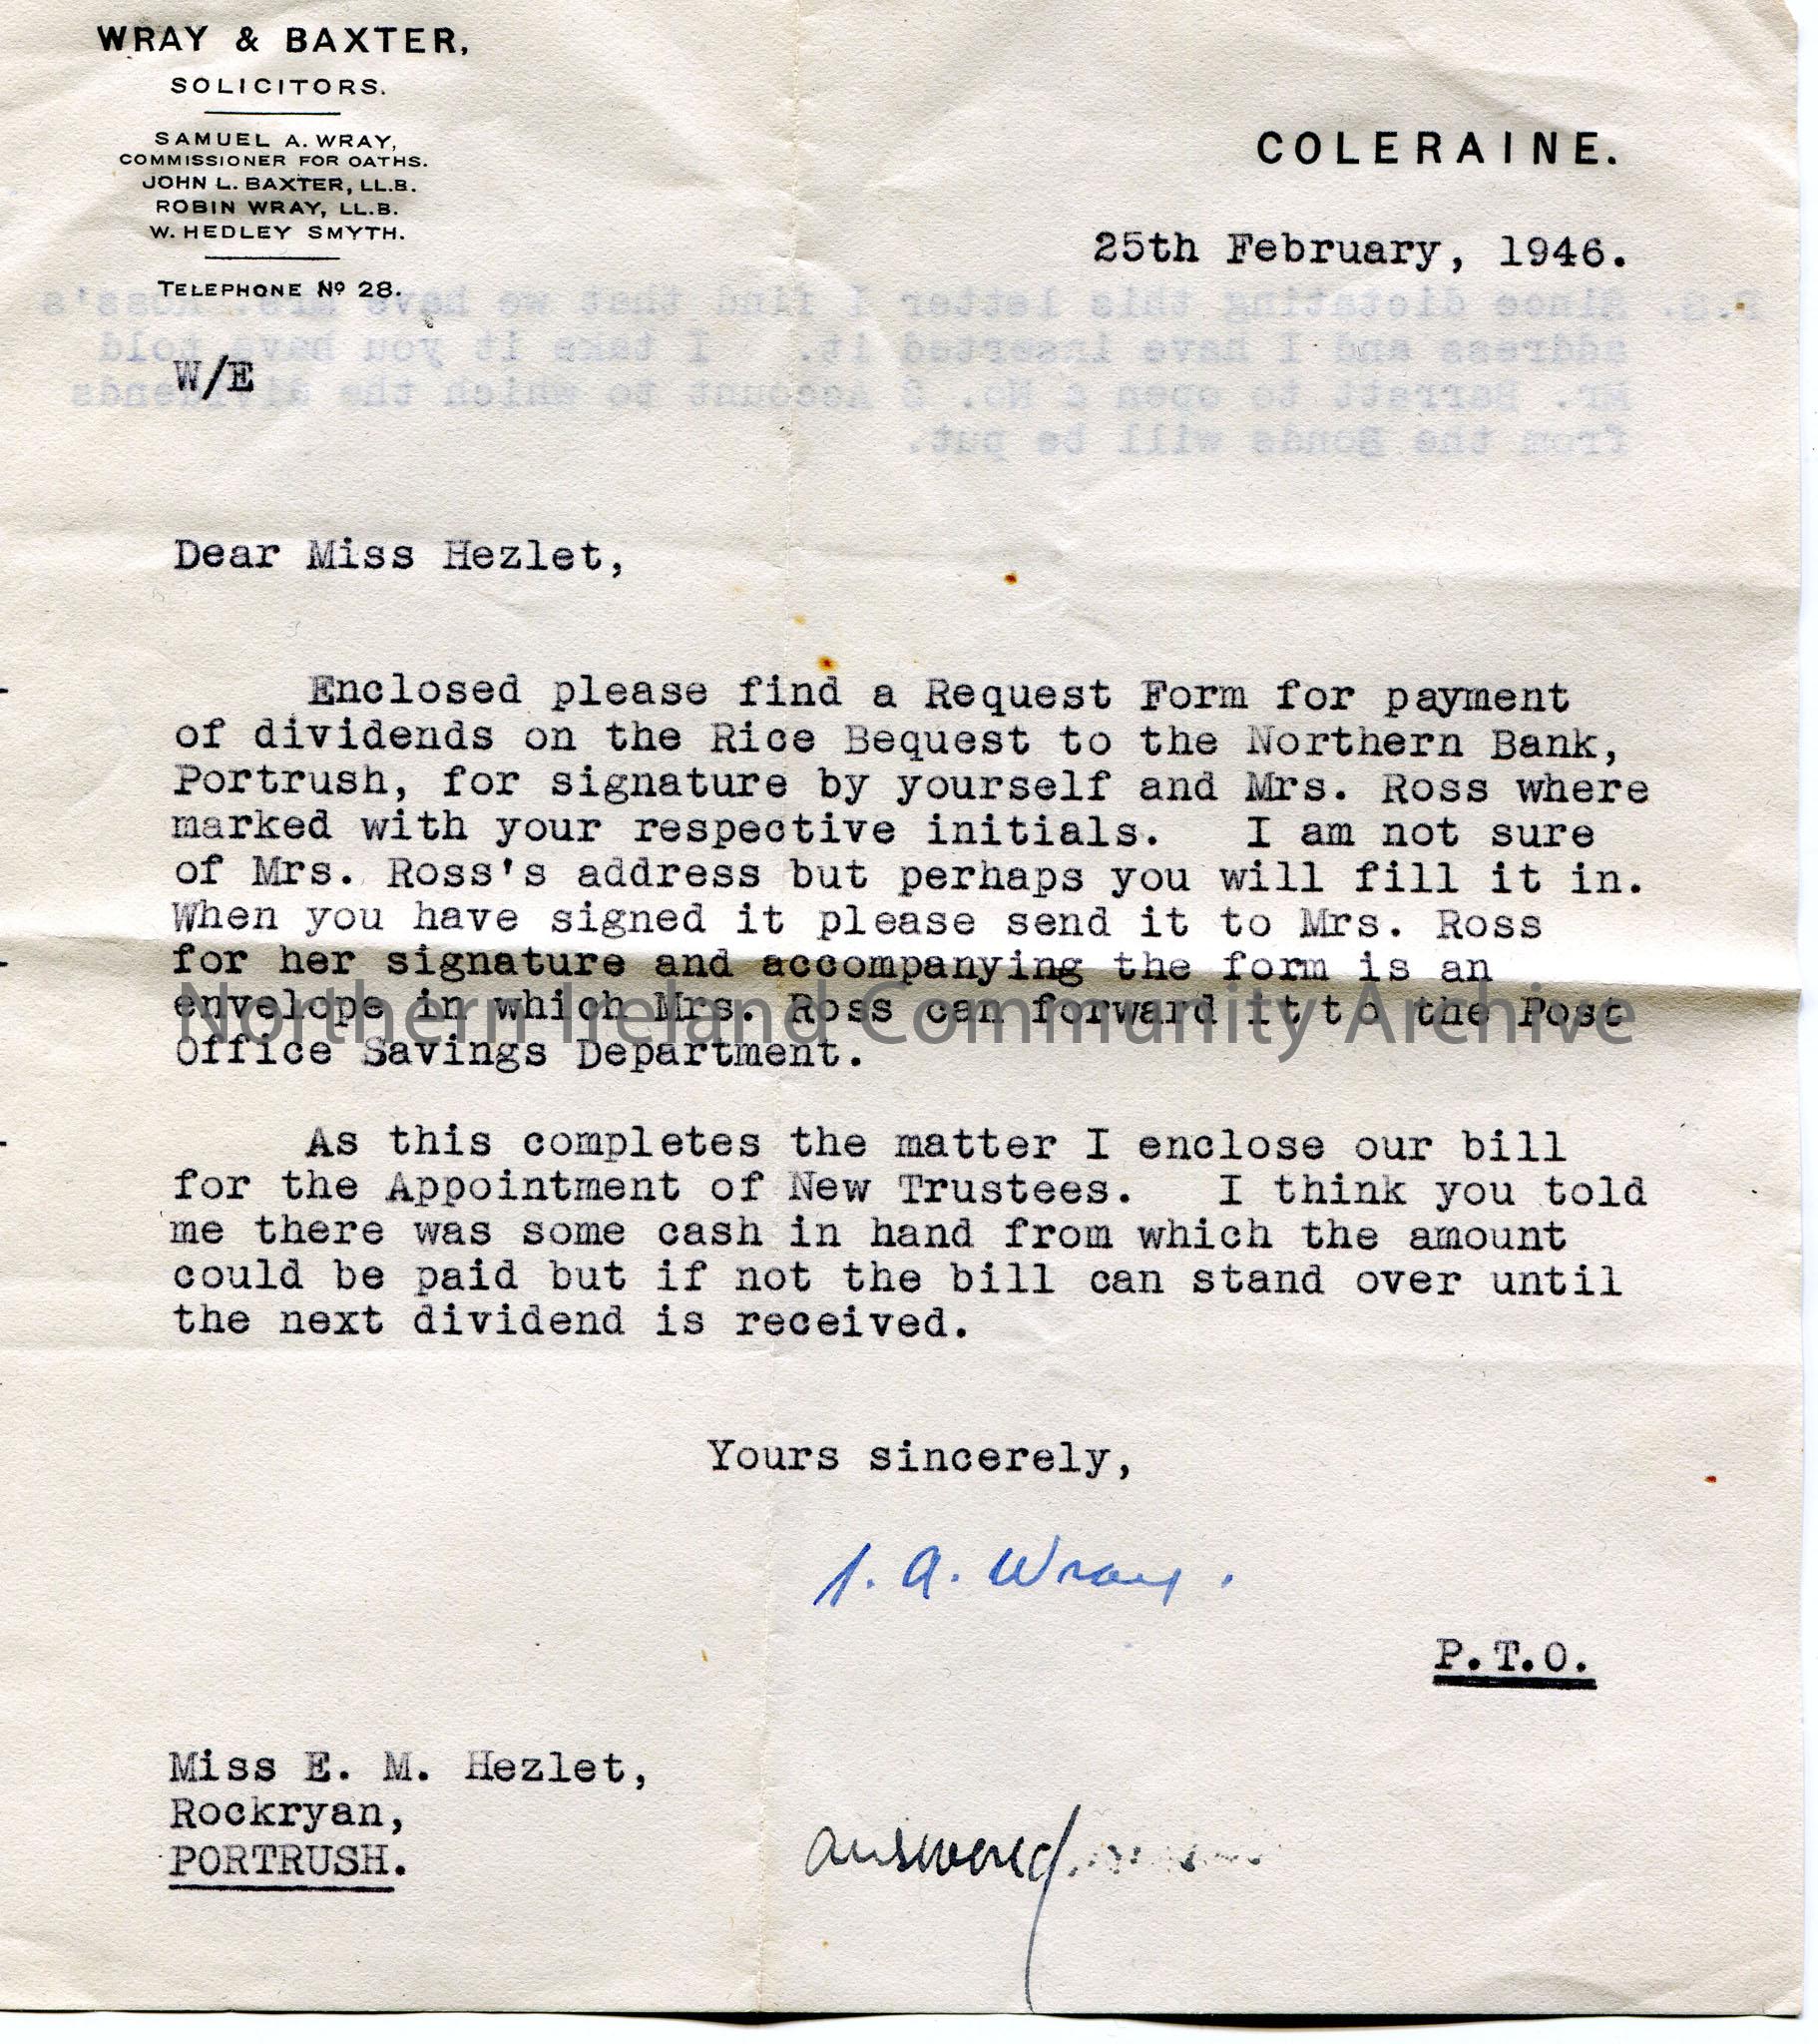 Typed letter, double sided, to Miss E. M. Hezlet at Rockryan, Portrush. Re Rice Bequest. Encloses Request Form for payment of dividends on the Rice Be…